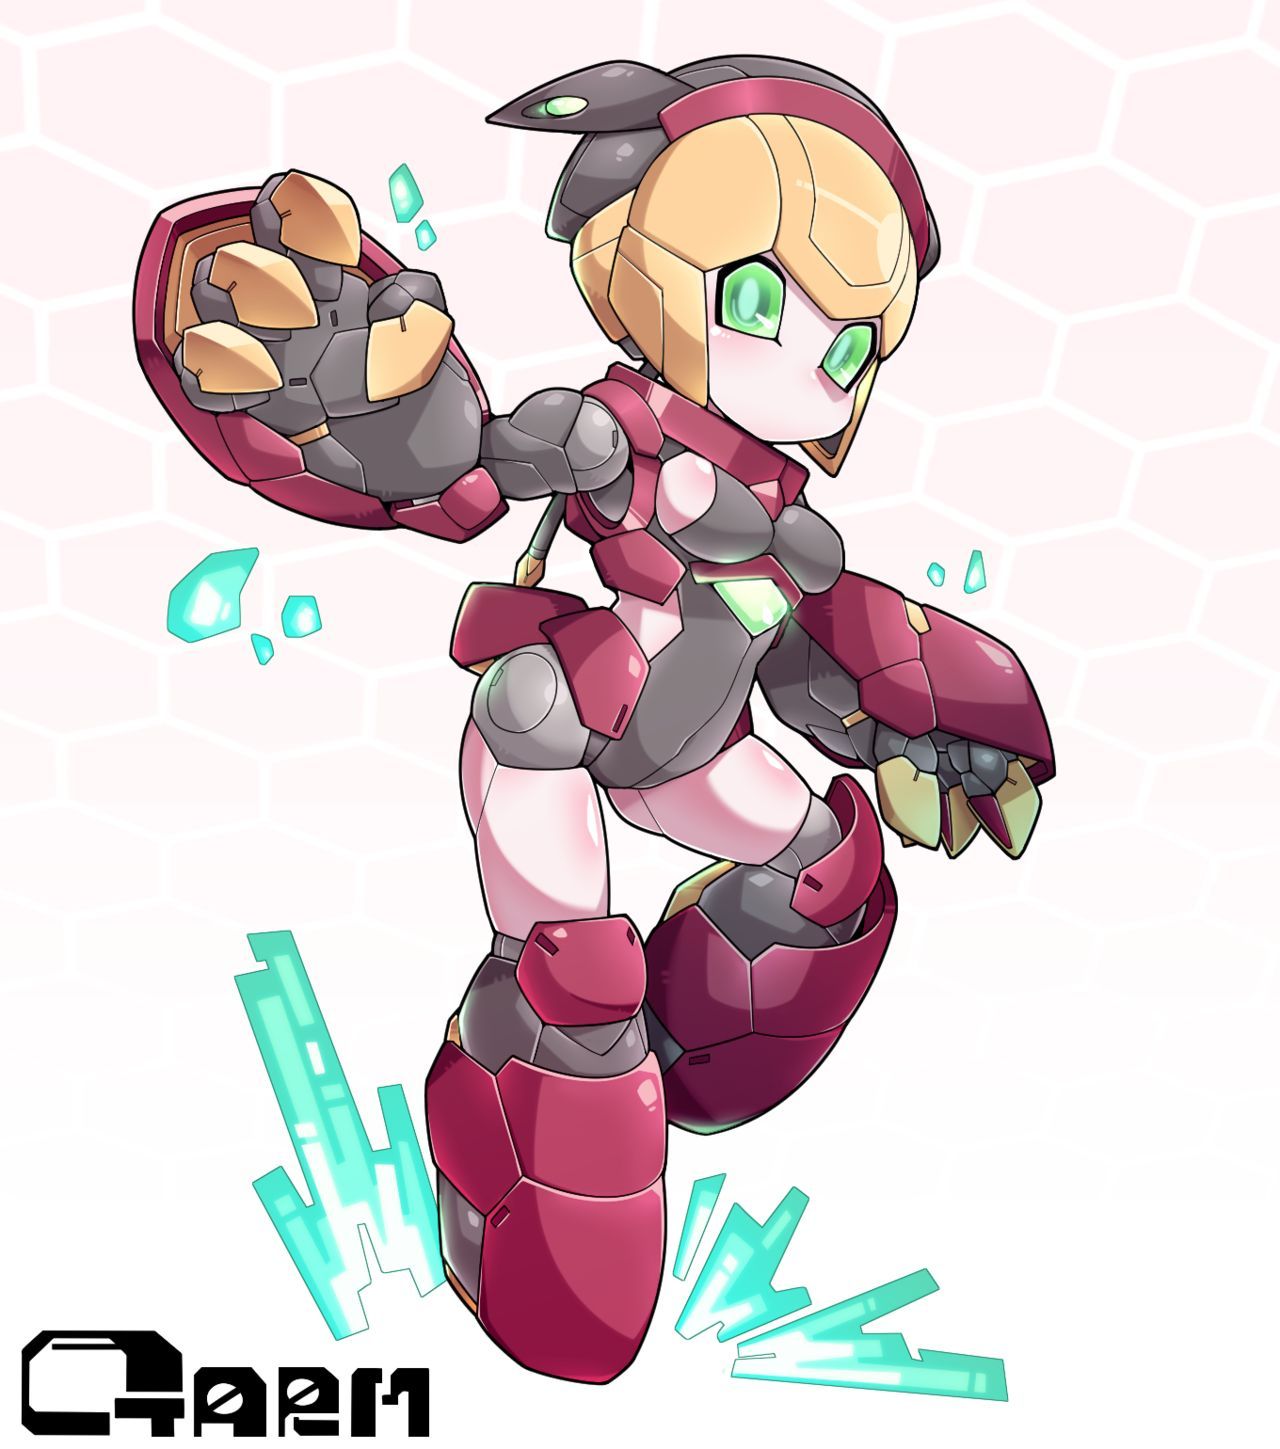 [Pixiv] kni-droid (Kにぃー, weis2626) (Pixiv ID: 1937581) 16